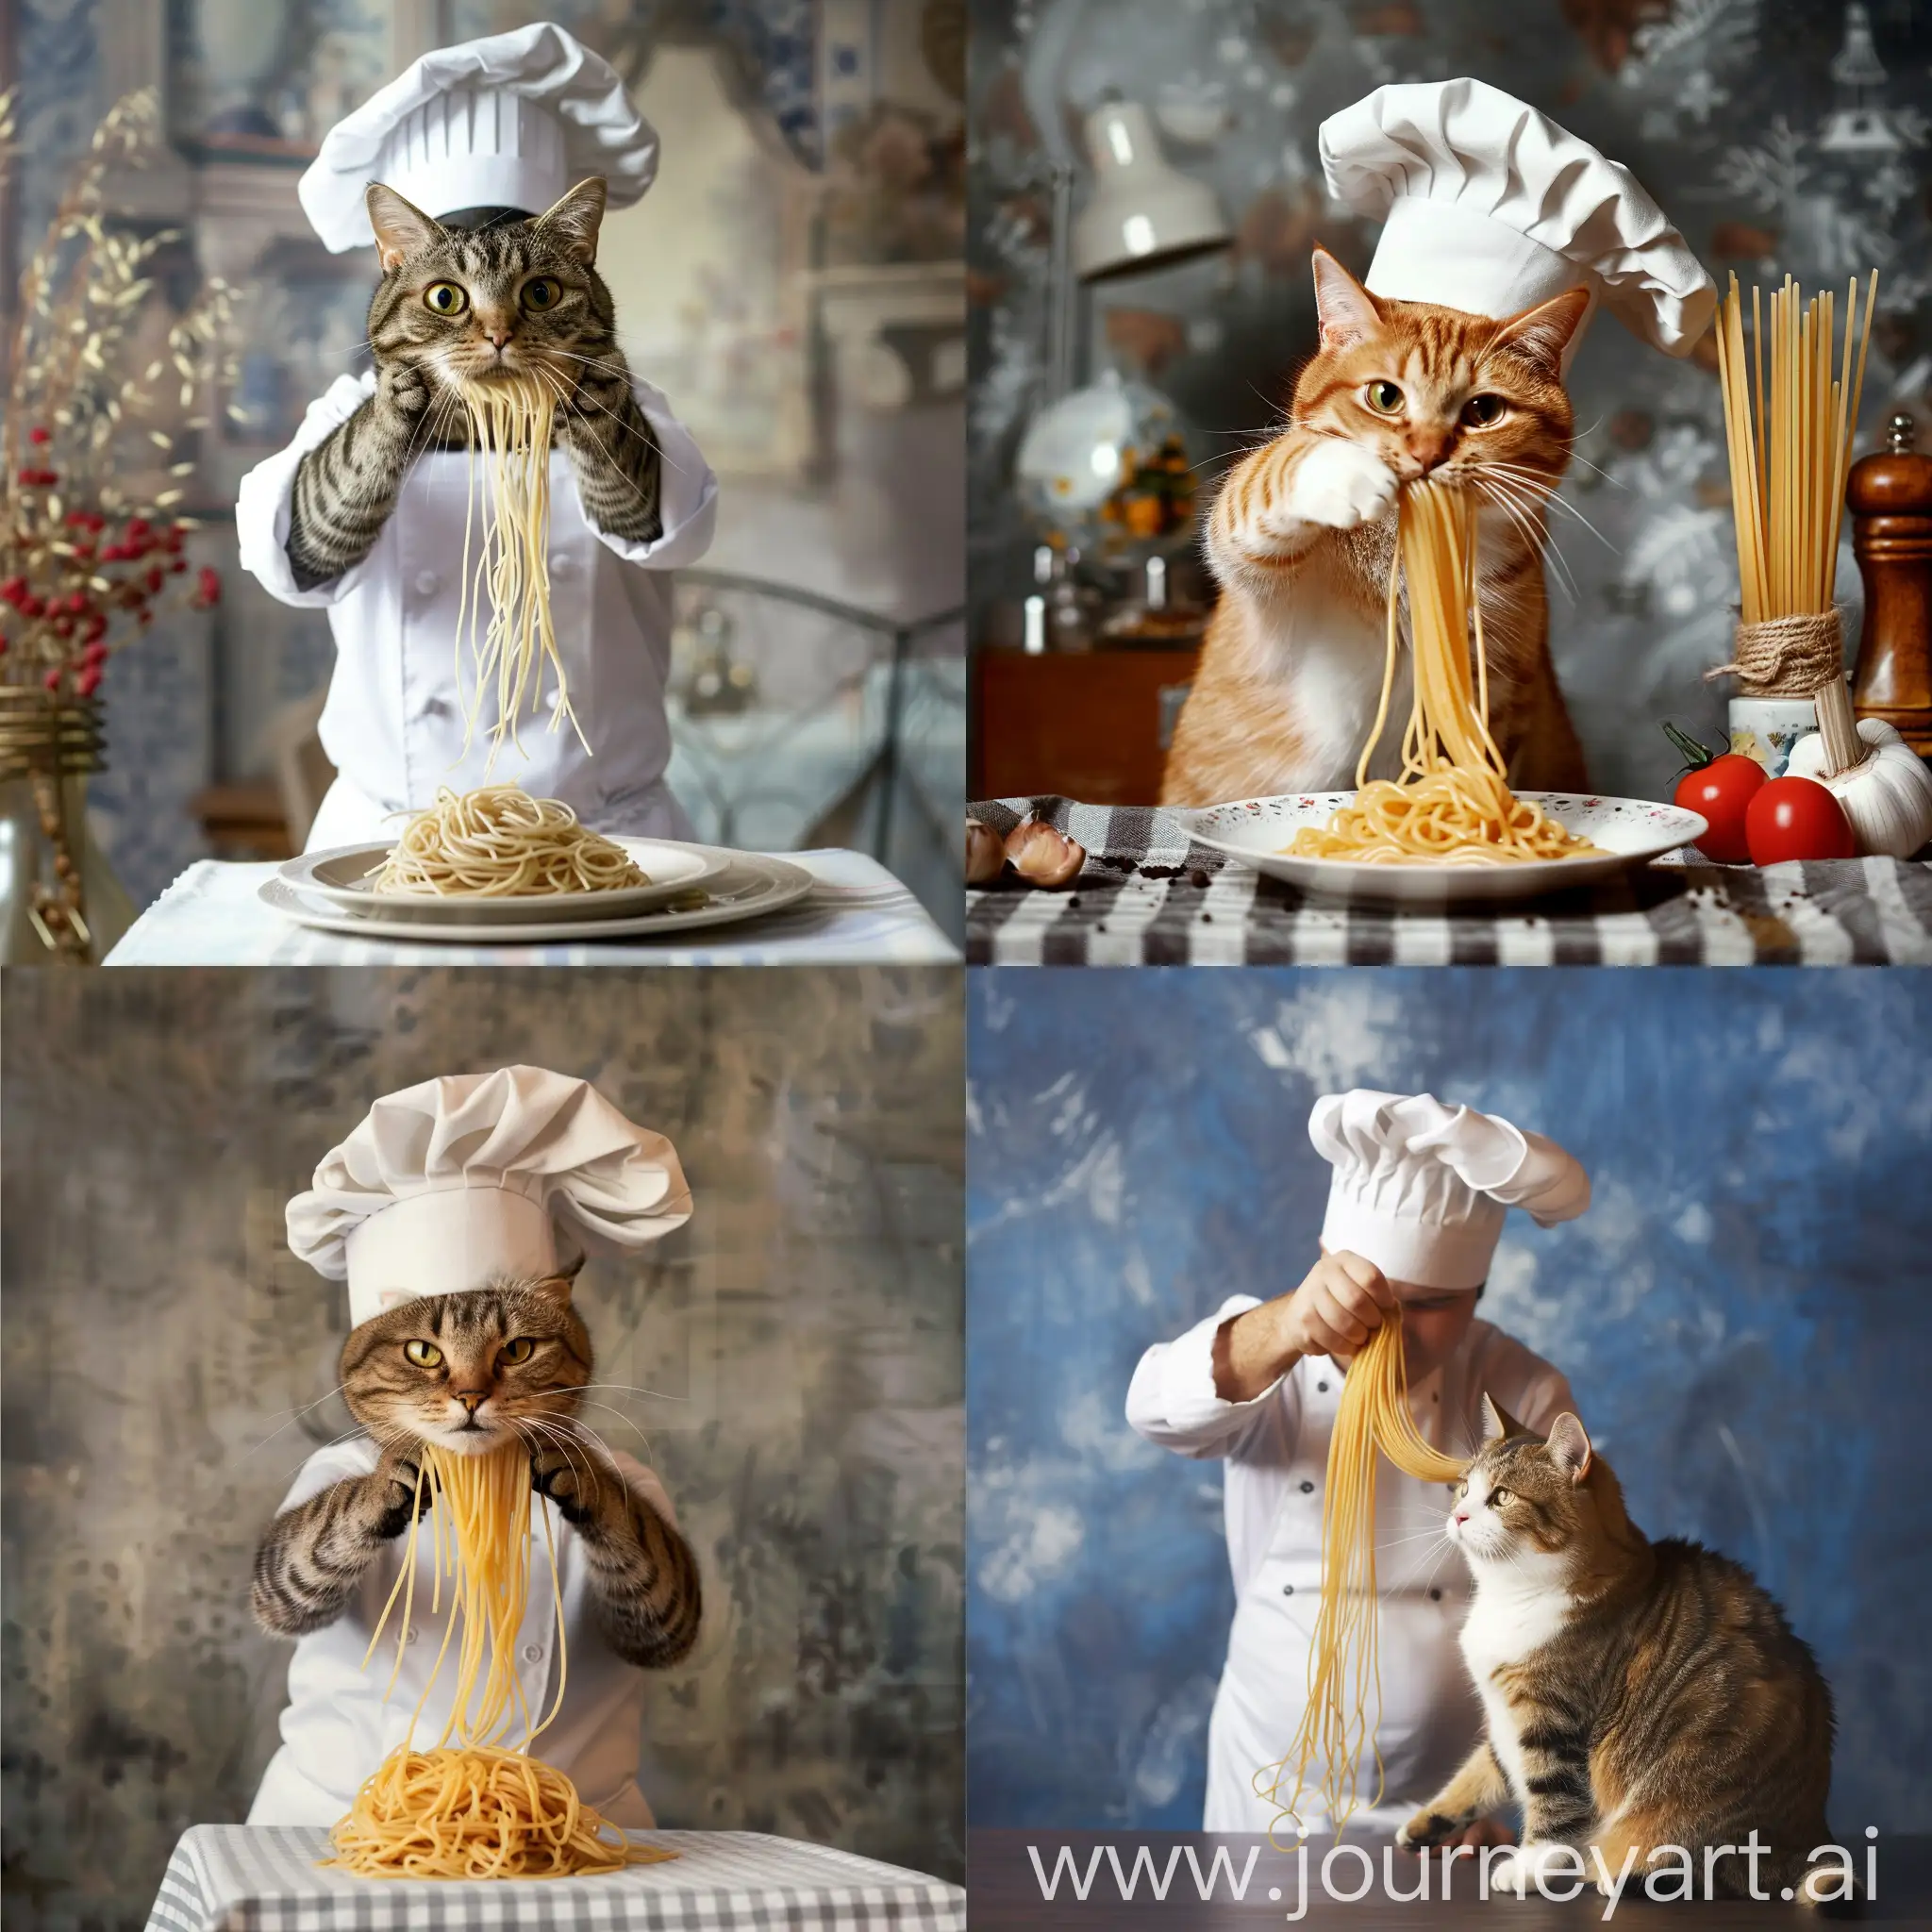 Cat lwith professional chef, using chef hat, bring spagheti noodle. Picture eksplain that food look delicius